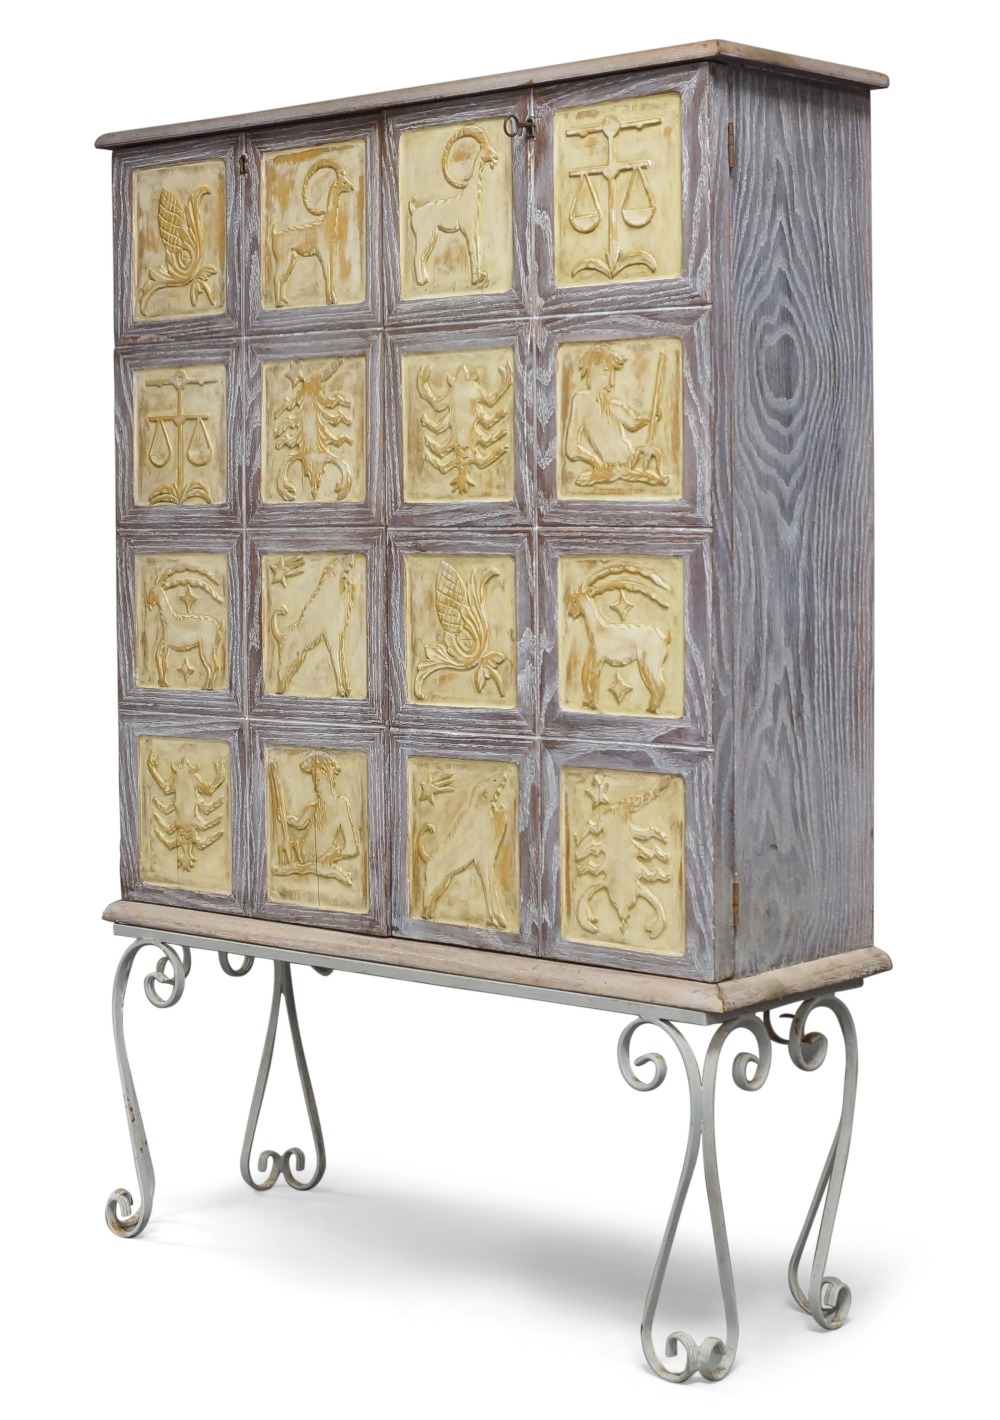 Designer Unknown, French Art Deco Zodiac cabinet on later wrought iron stand, circa 1940, Painted - Image 2 of 3